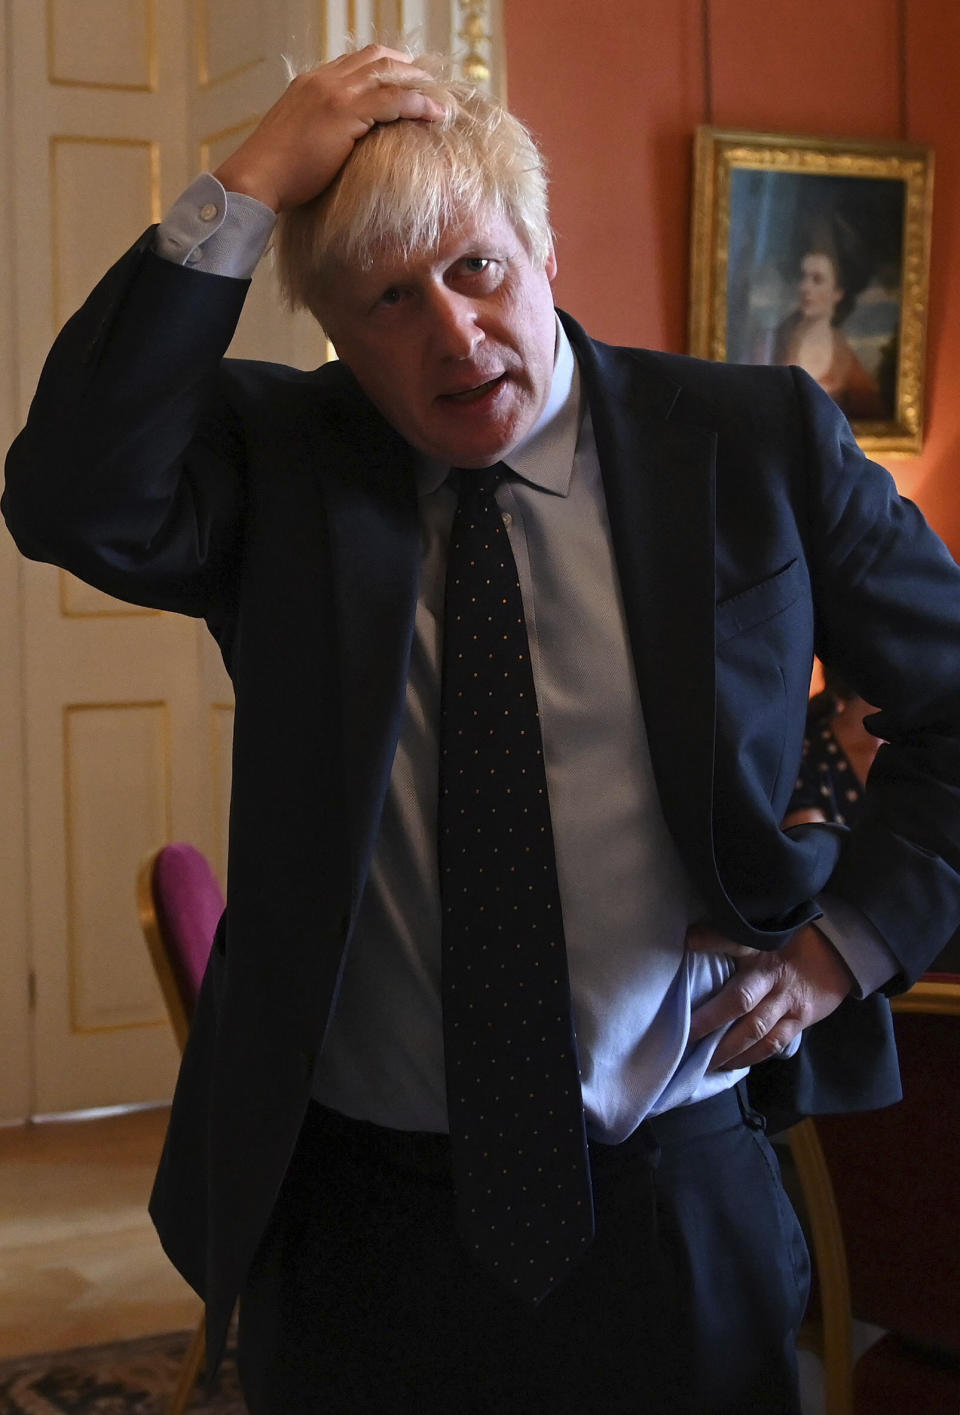 Britain's Prime Minister Boris Johnson speaks with NHS workers during a reception at 10 Downing Street, London, Tuesday, Sept. 3, 2019. Britain's opposition leader has attacked Prime Minister Boris Johnson for trying to run a "cabal" from Downing Street in order to take Britain out of the European Union without a deal despite the costs. (Daniel Leal-Olivas/Pool Photo via AP)